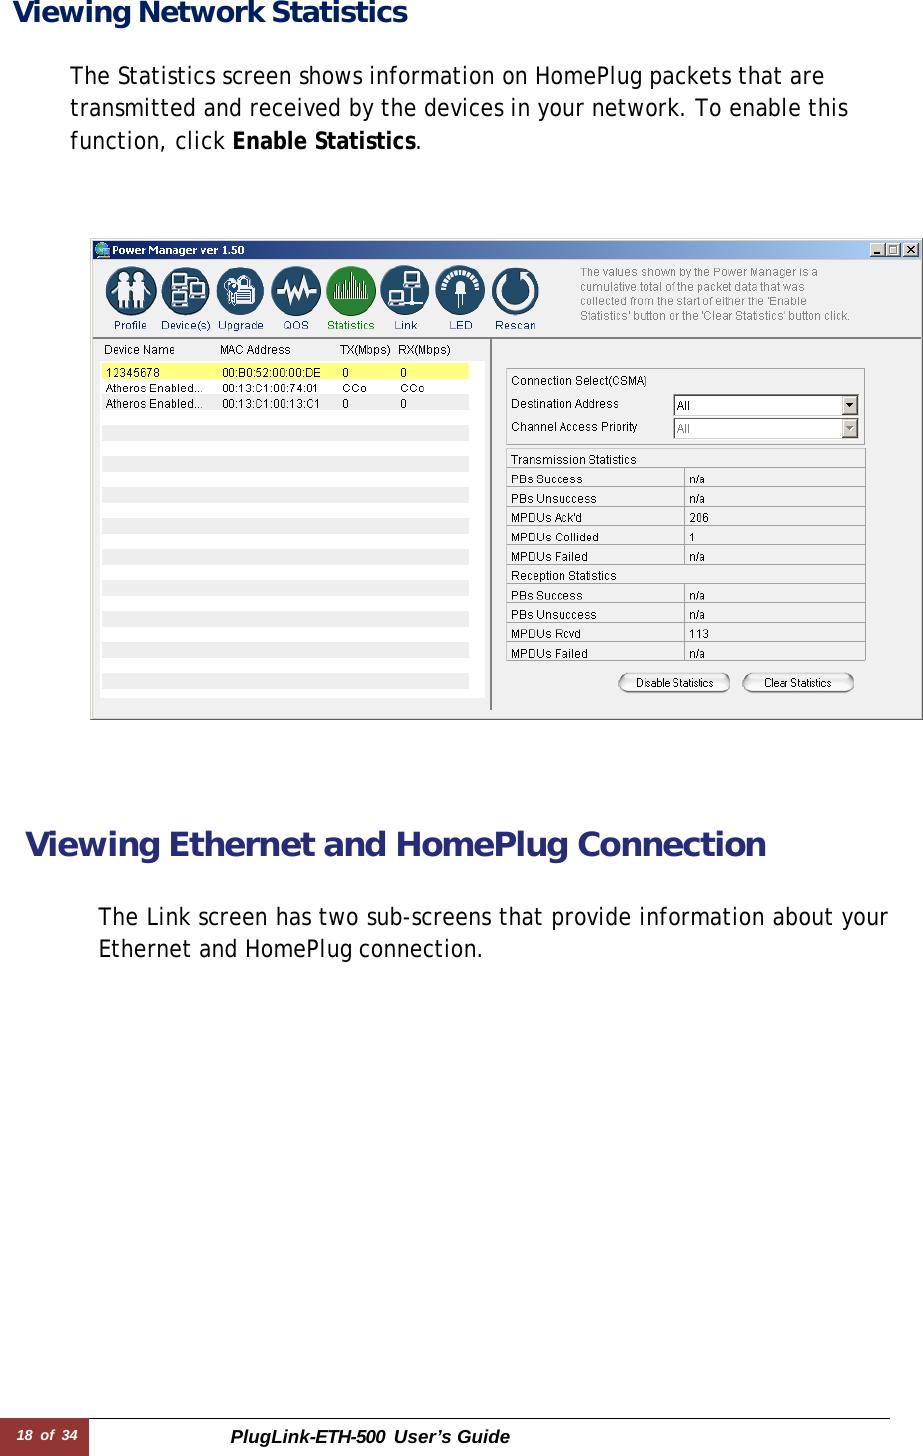 18 of 34 PlugLink-ETH-500  User’s Guide  Viewing Network Statistics   The Statistics screen shows information on HomePlug packets that are transmitted and received by the devices in your network. To enable this function, click Enable Statistics.            Viewing Ethernet and HomePlug Connection   The Link screen has two sub-screens that provide information about your Ethernet and HomePlug connection. 